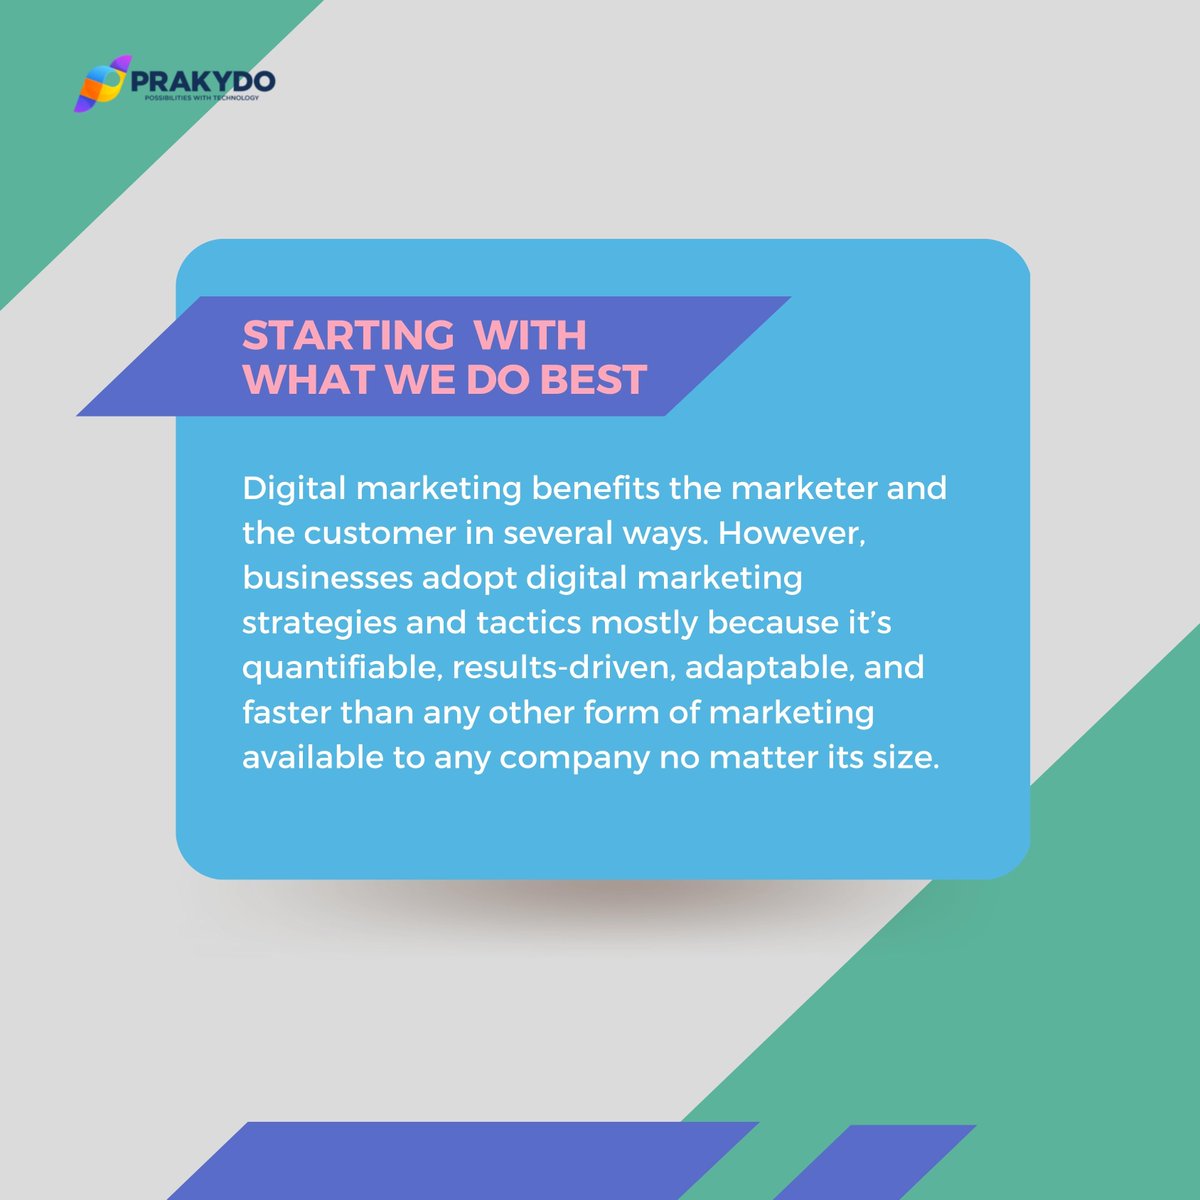 Digital marketers are best in several ways, but in most ways they are business adopters and masters in strategies no matter how the companies results are driven. #marketingdigital #digitalmarketing #marketingtips #digitalinfluencer #digitalnetworkmarketing #beginners